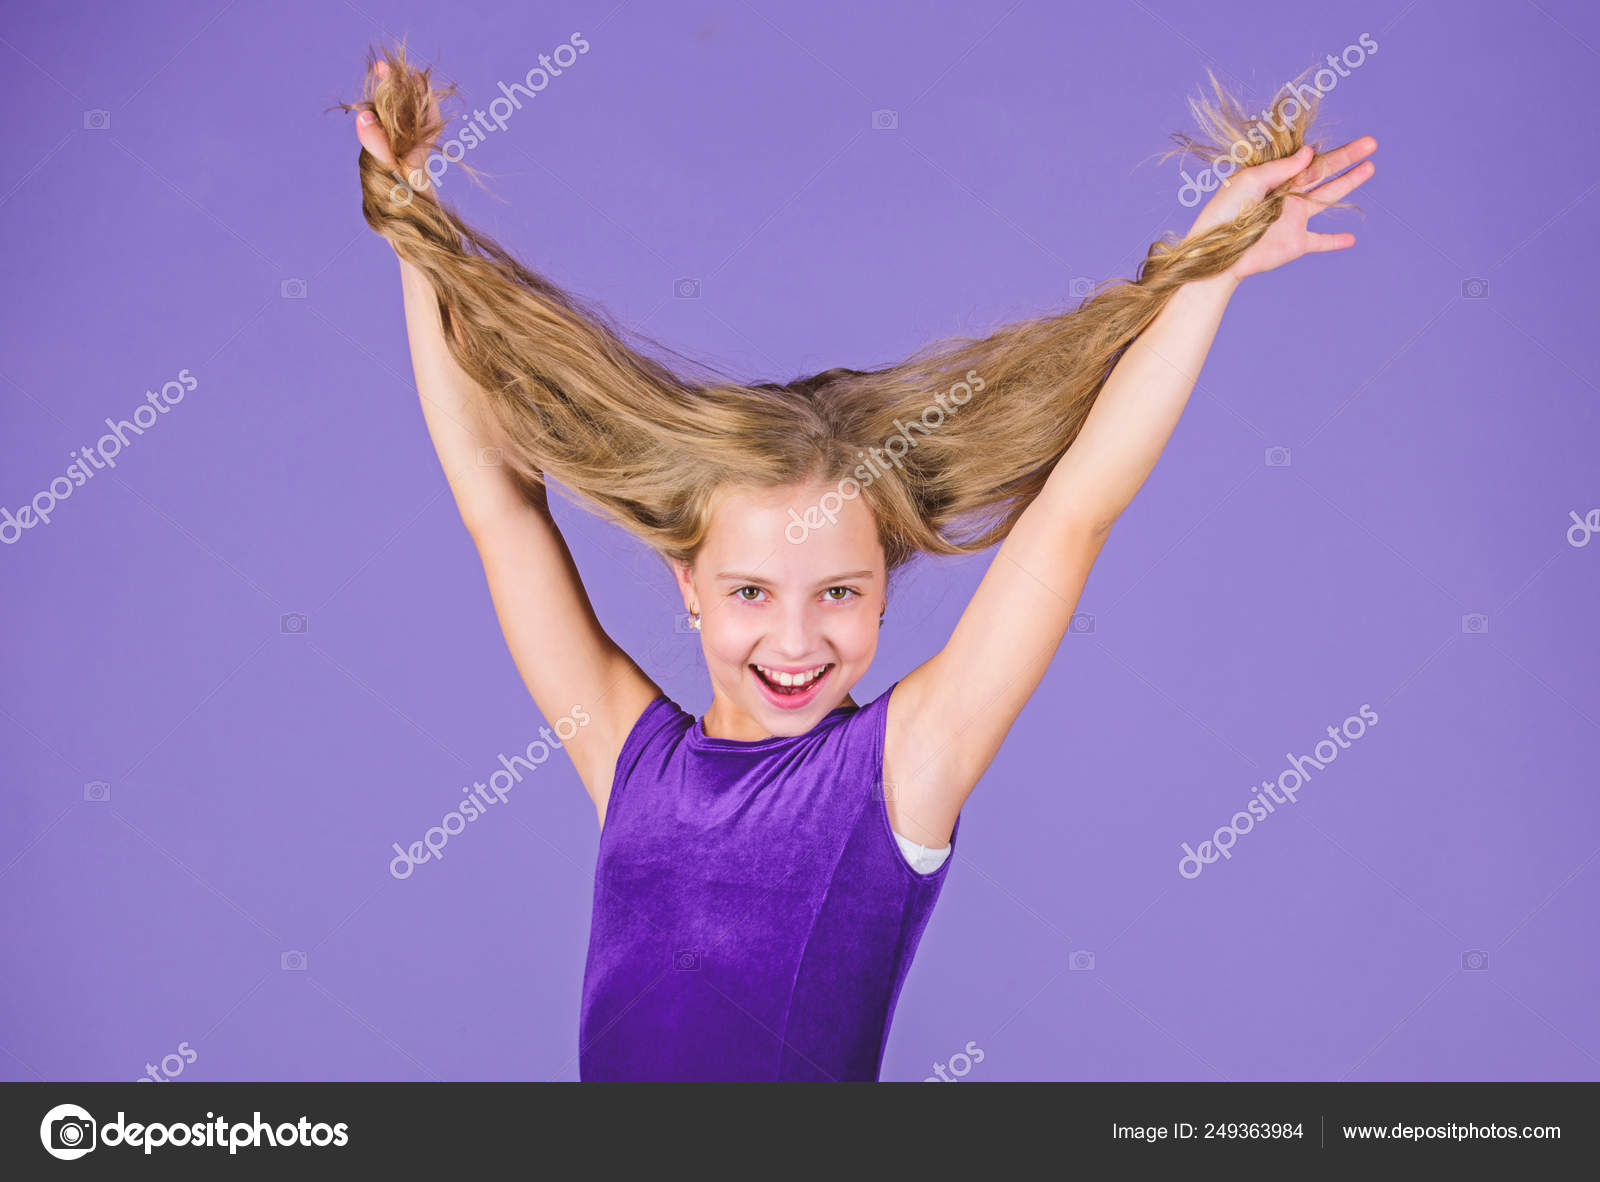 Kid Girl With Long Hair Wear Dress On Violet Background